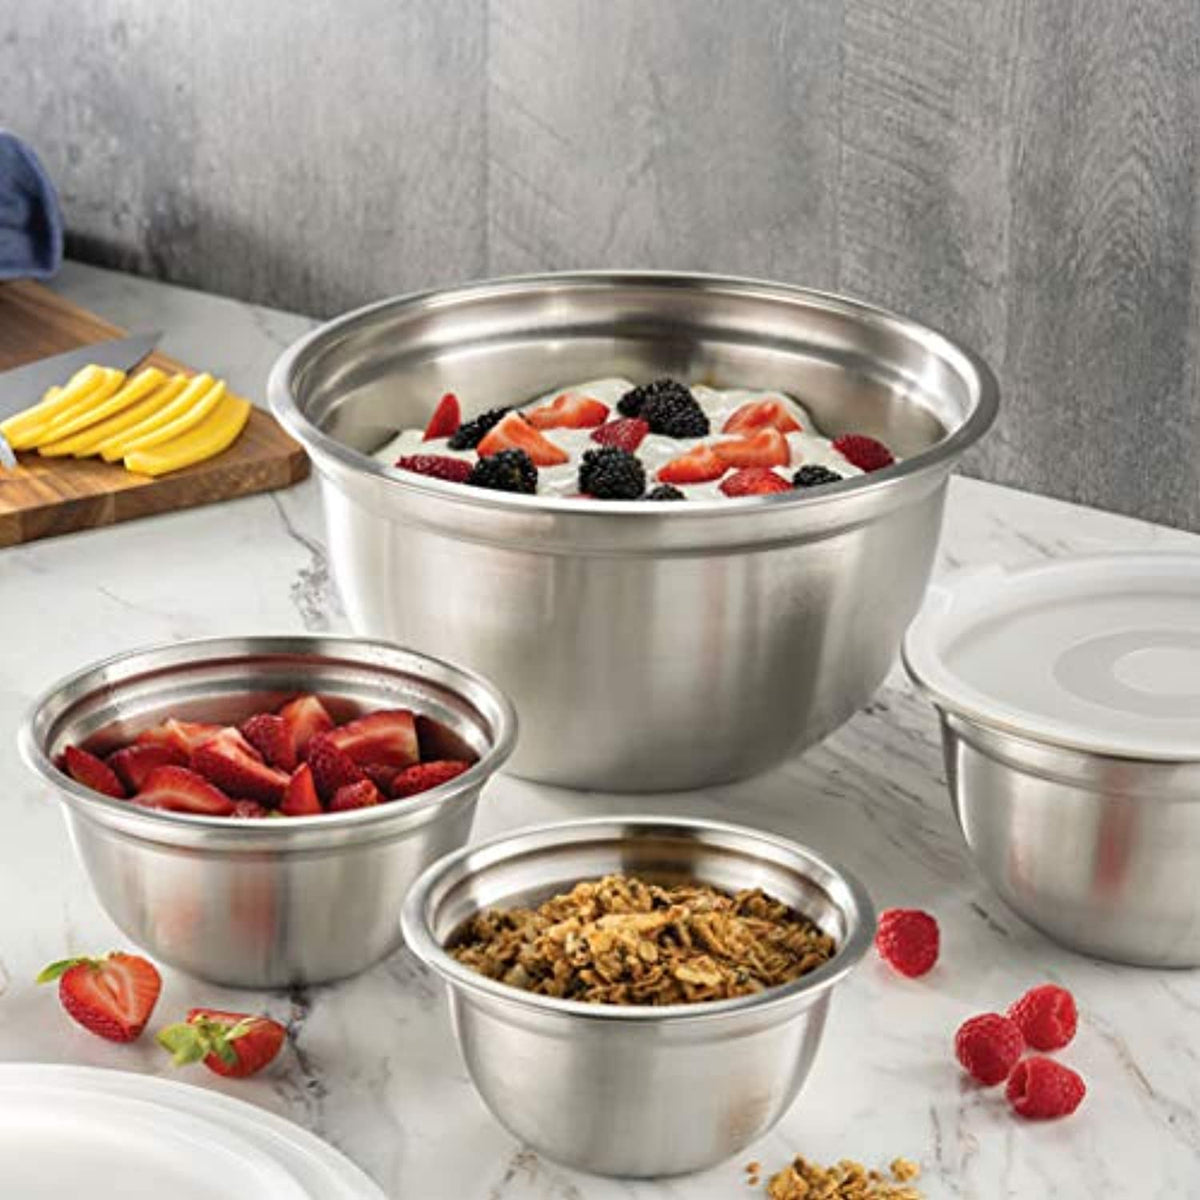 24 Pack] 5 Quart Medium Stainless Steel Mixing Bowl - Baking Bowl, Flat  Base Bowl, Preparation Bowls - Great for Baking, Kitchens, Chef's, Home use  by EcoQuality (5 qt) 